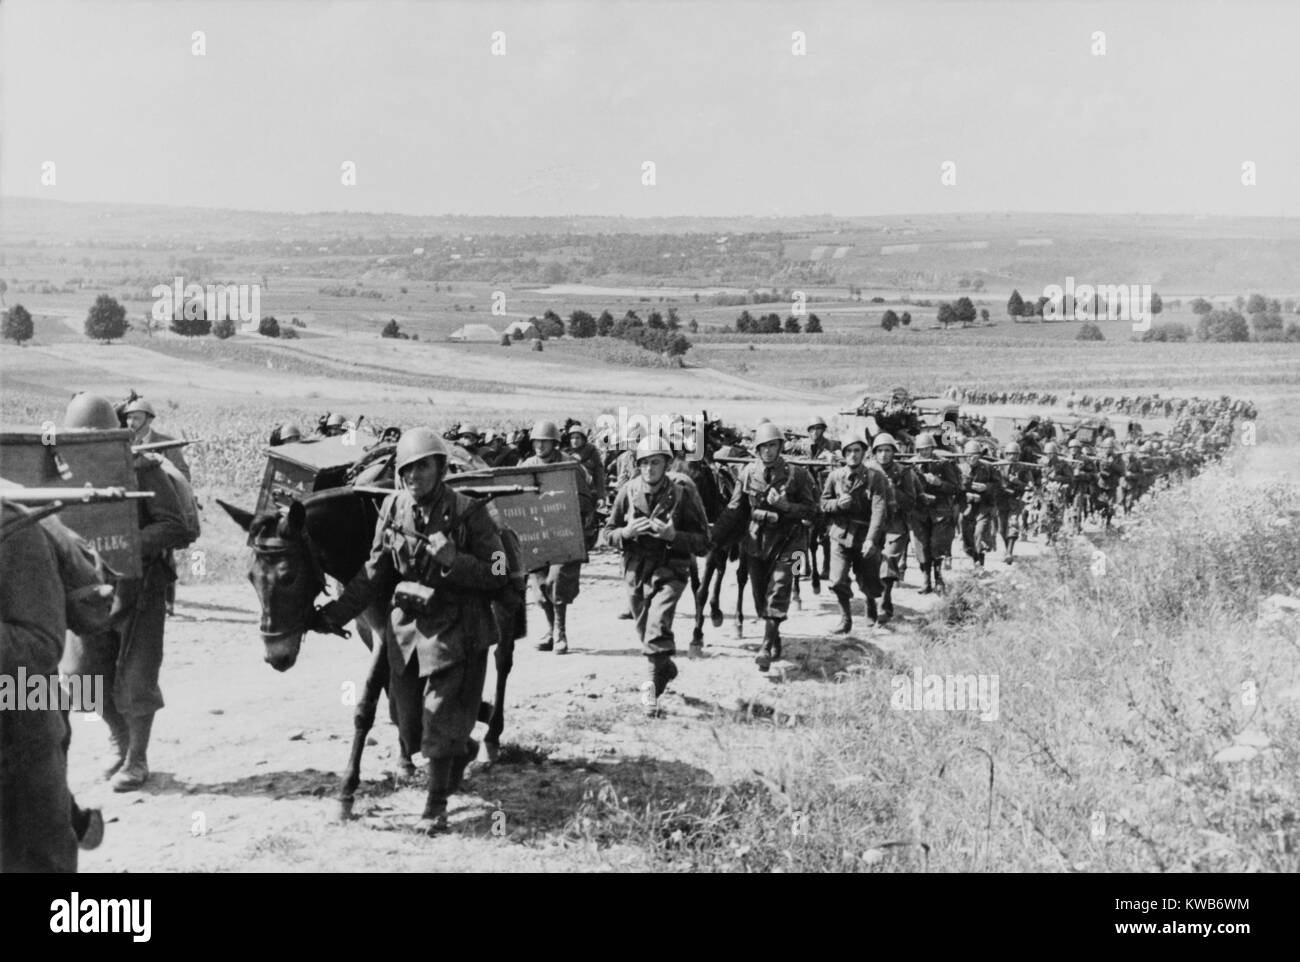 Italian expeditionary troops and artillery march to the Eastern front during World War 2. July 1941. Allied with Nazi Germany, Italian troops performed poorly in their advance on the South Front of Operation Barbarossa. In the Soviet Union (Russia), during World War 2. (BSLOC 2014 8 6) Stock Photo